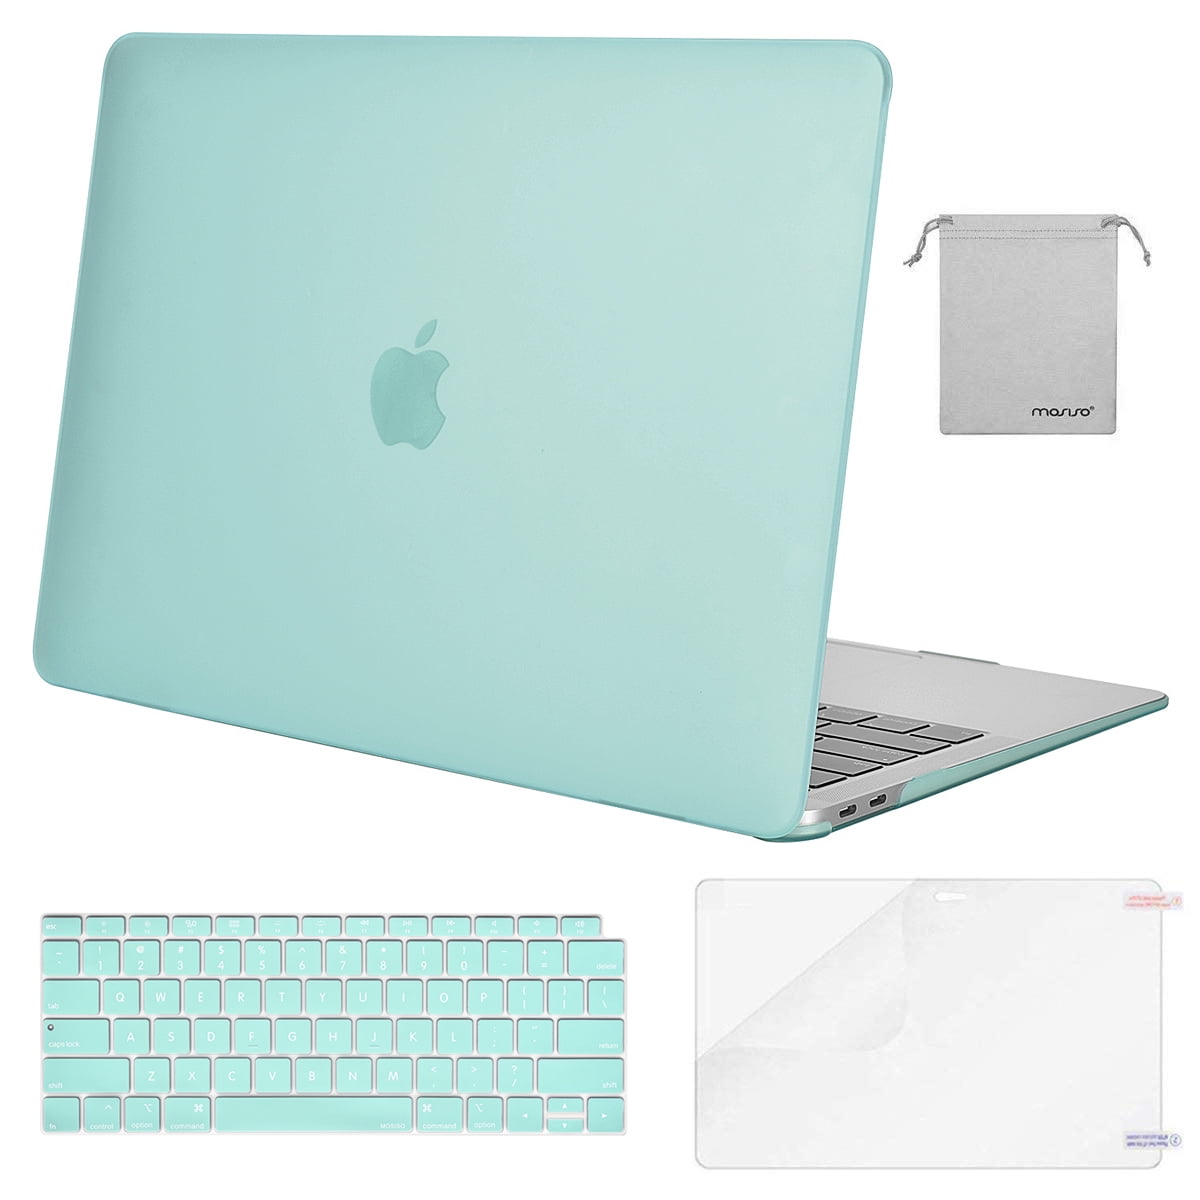 Hard Case for 2016 2017 2018 New MacBook pro 15 inch Model A1707/A1990 AQYLQ Matte Plastic Hard Protective Shell Cover for Apple Newest Macbook Pro 15 791 colorful cloud